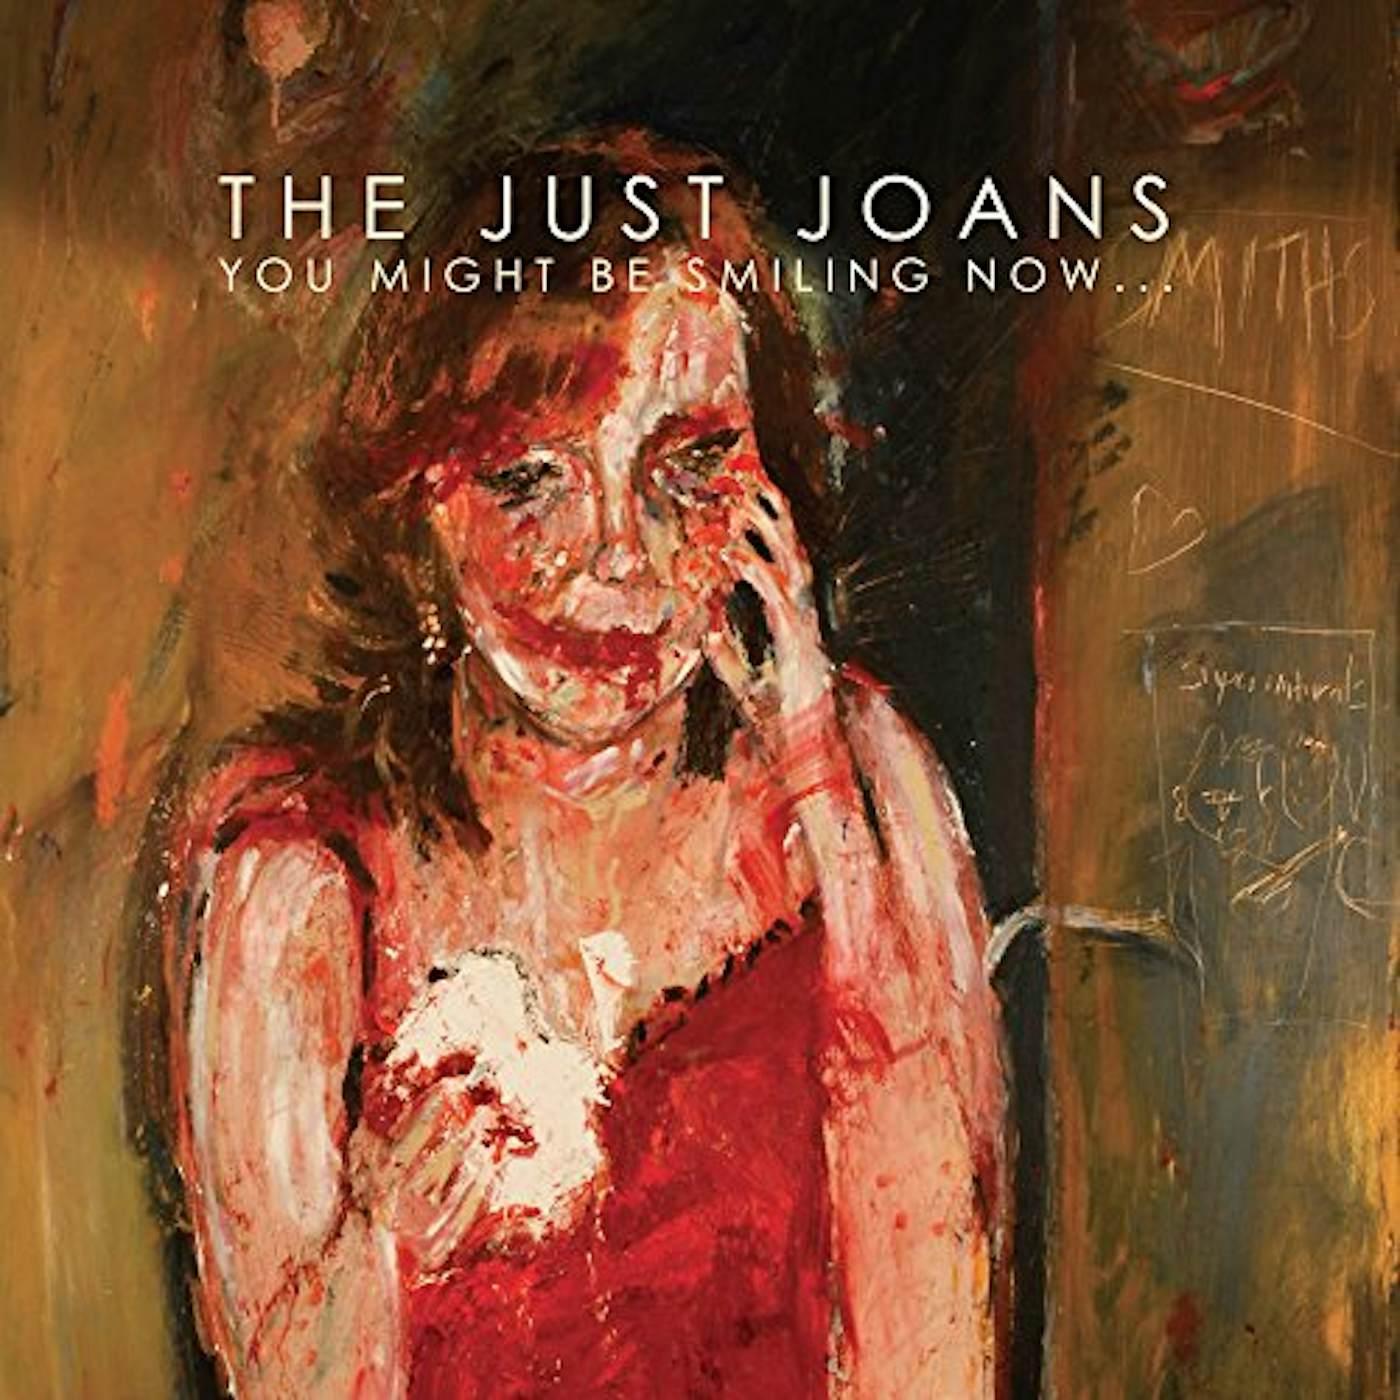 The Just Joans YOU MIGHT BE SMILING NOW CD